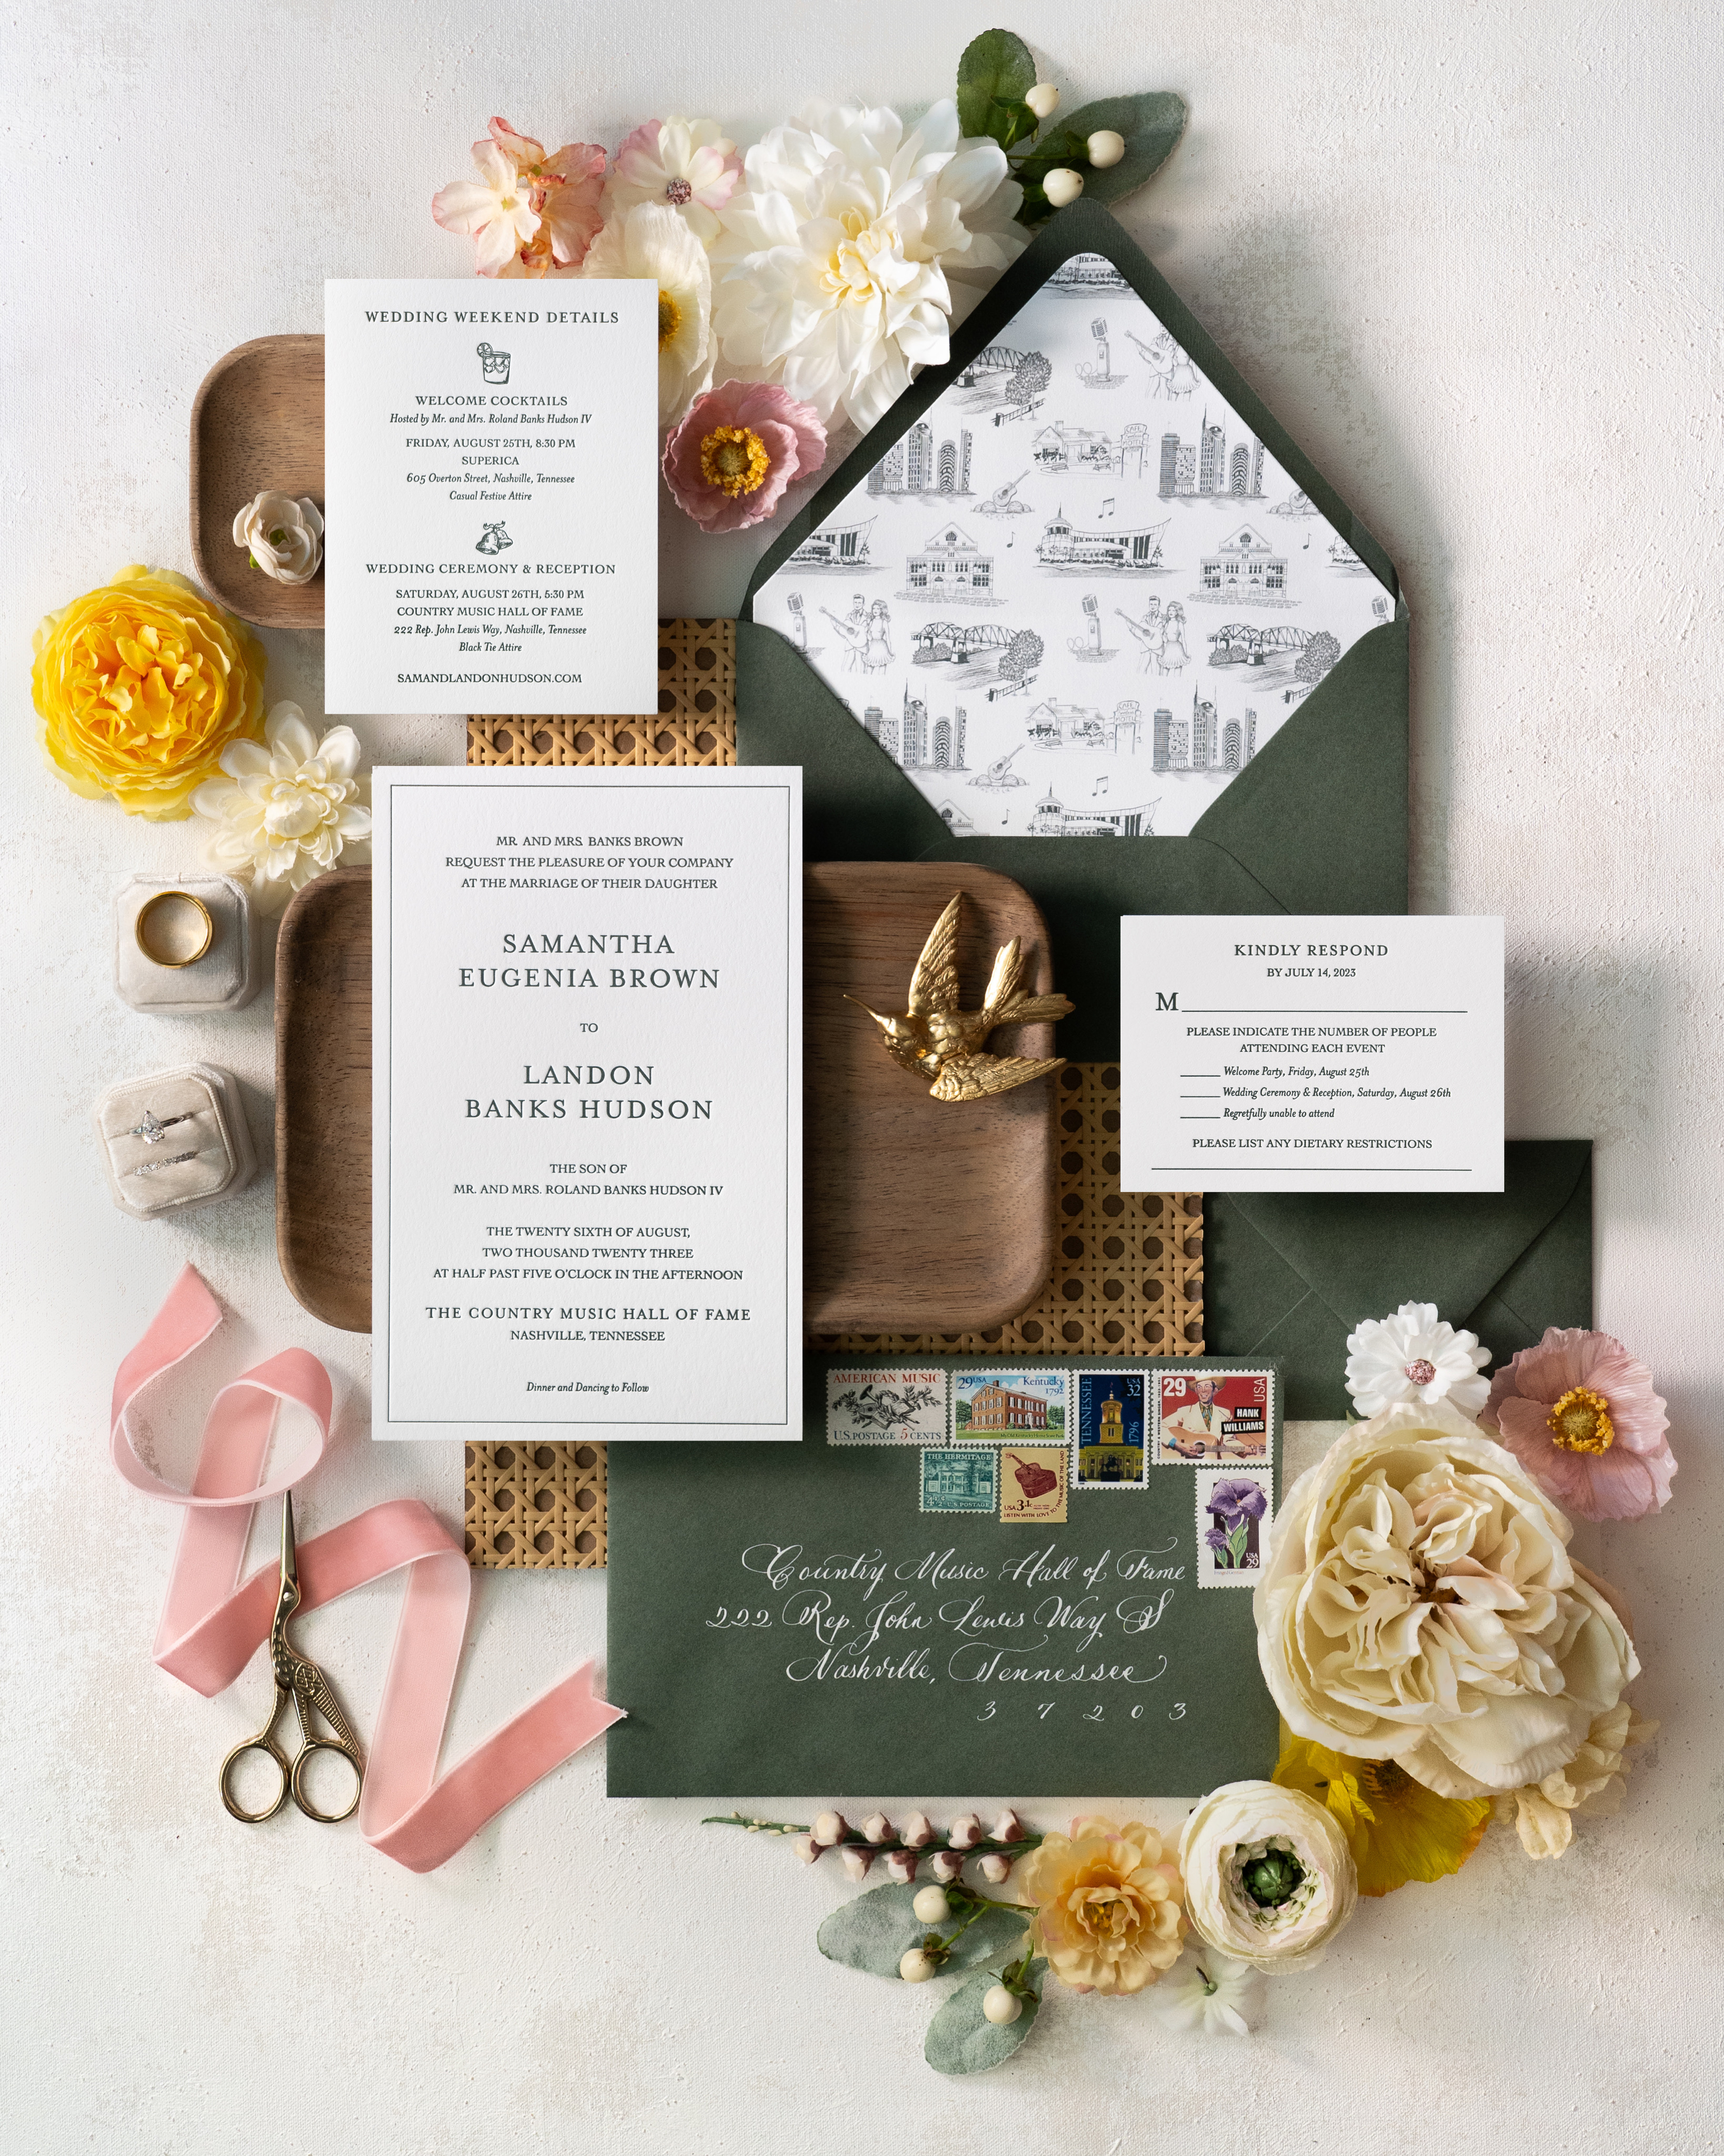 Custom wedding invitation suite flat lay styled with florals, wooden trays, ornamented pieces.